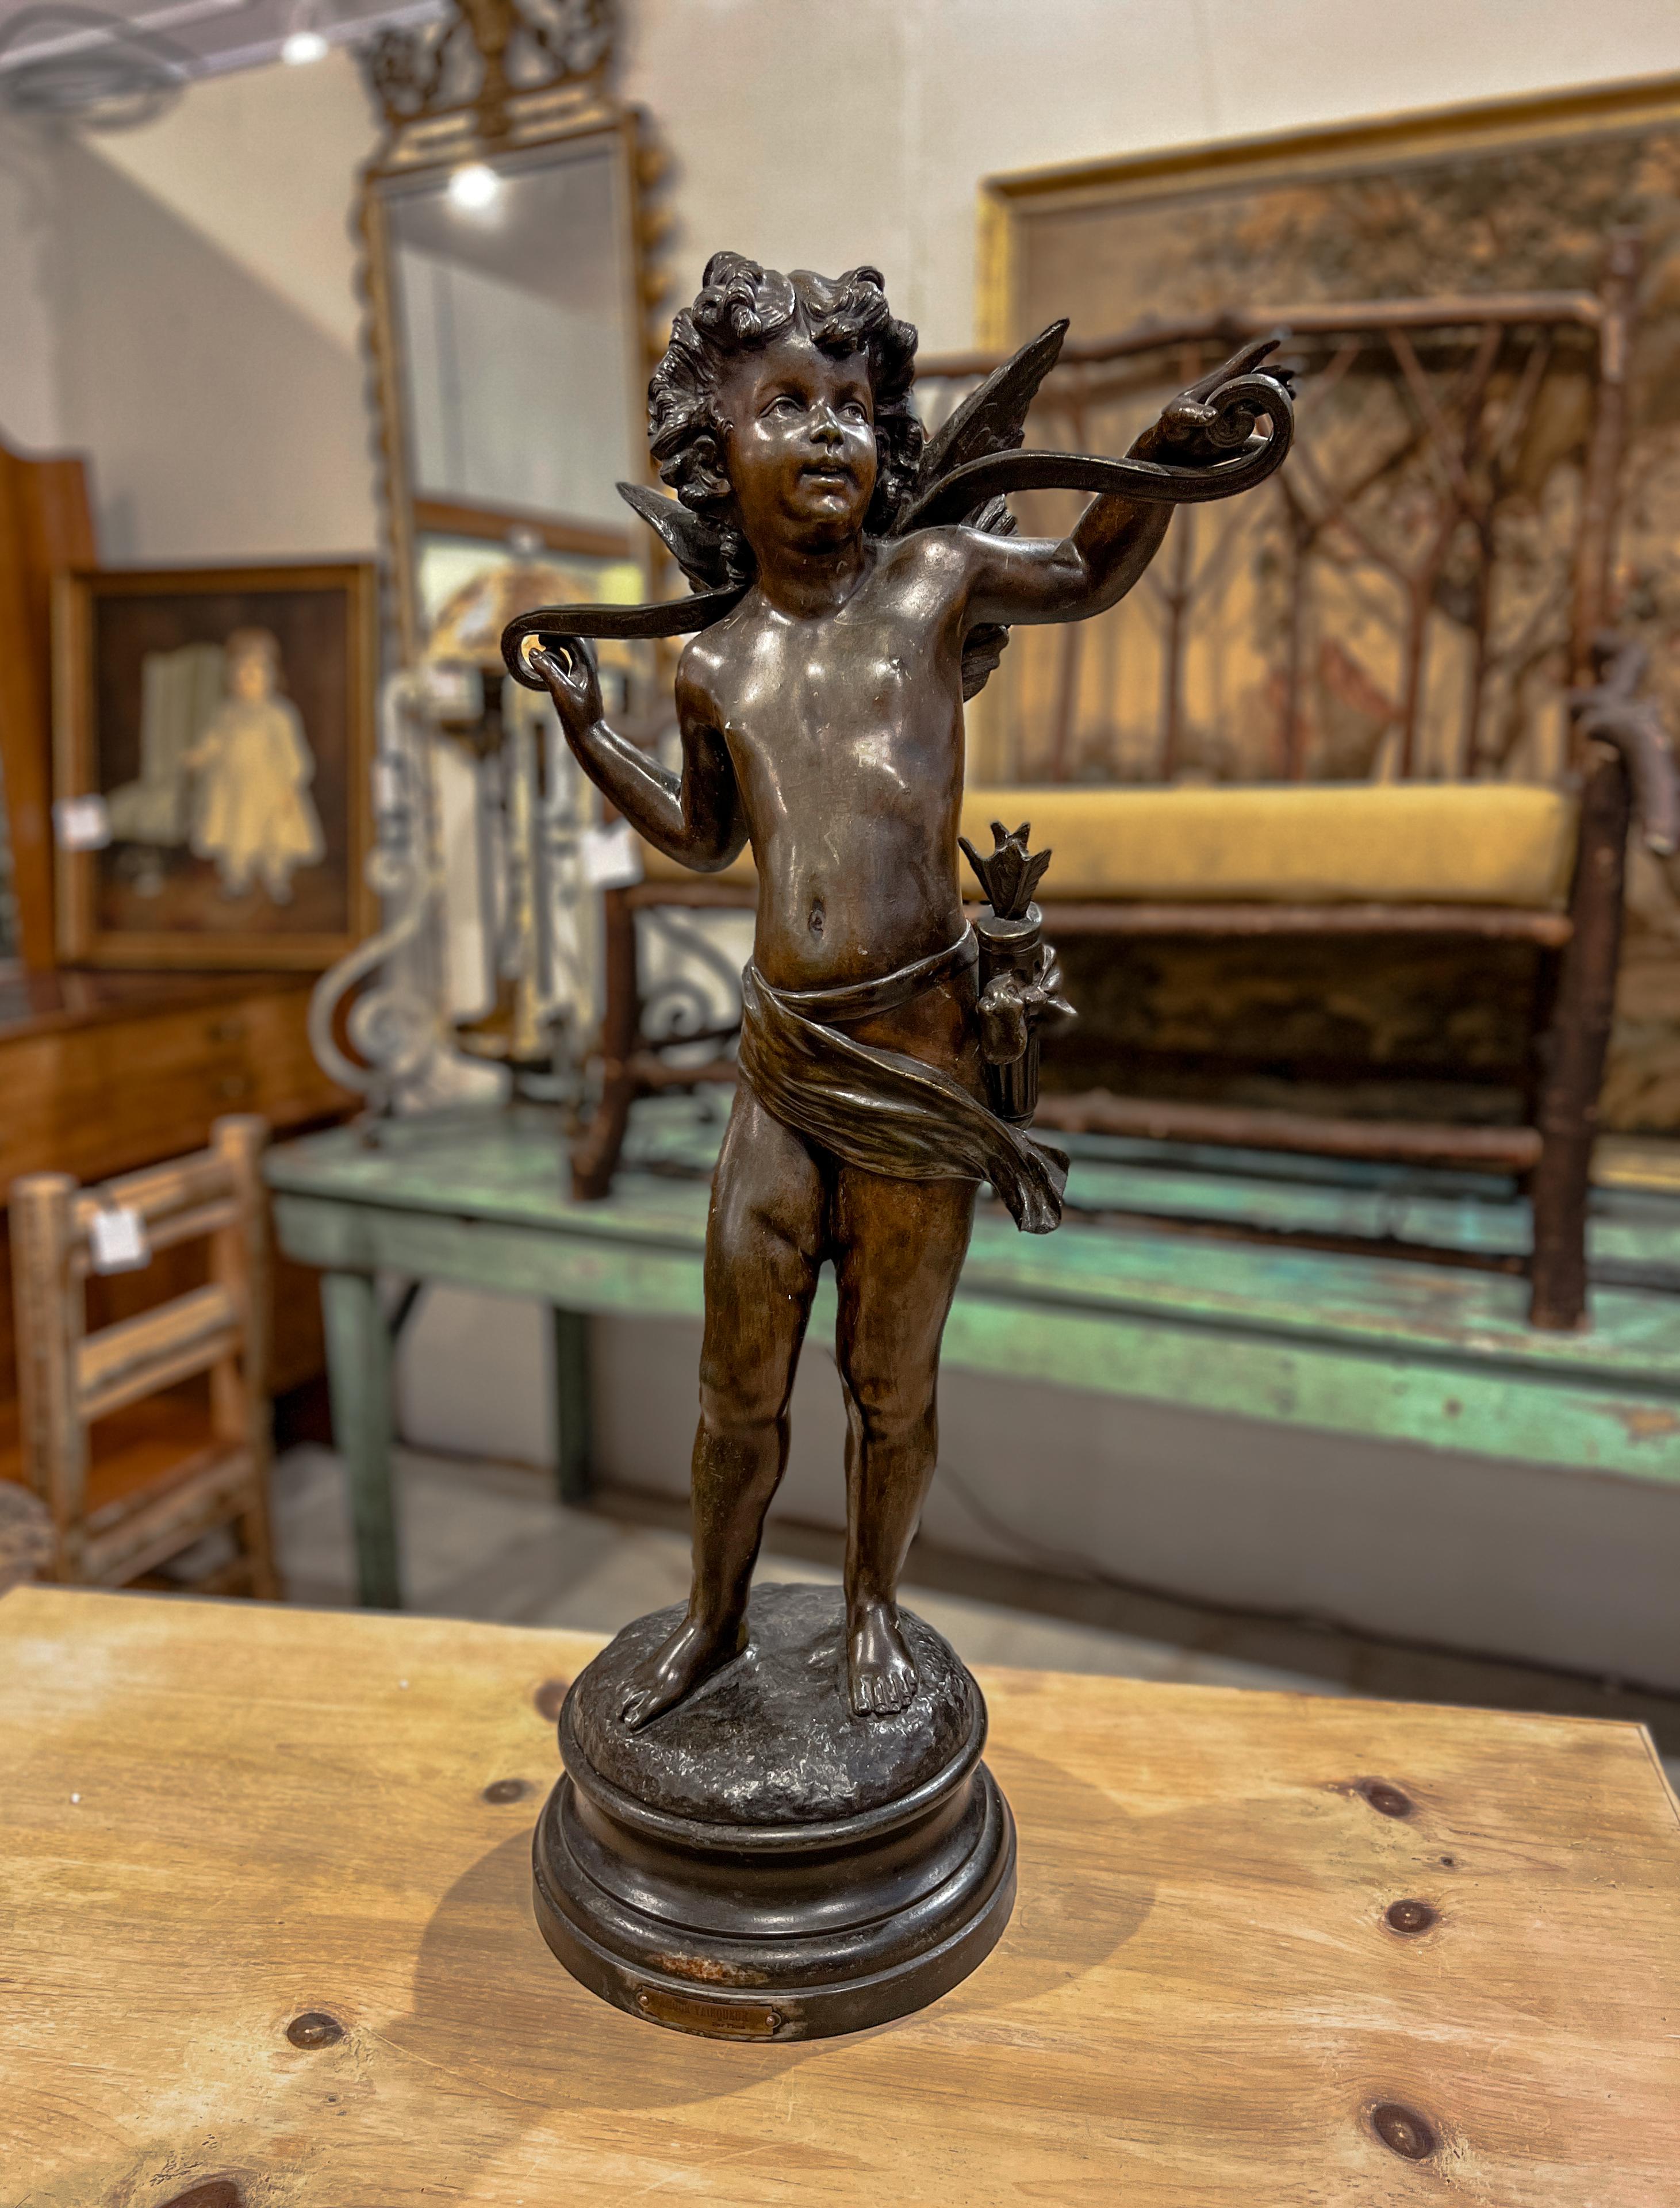 Large bronze-color statue of Cupid. The plaque on the base says 